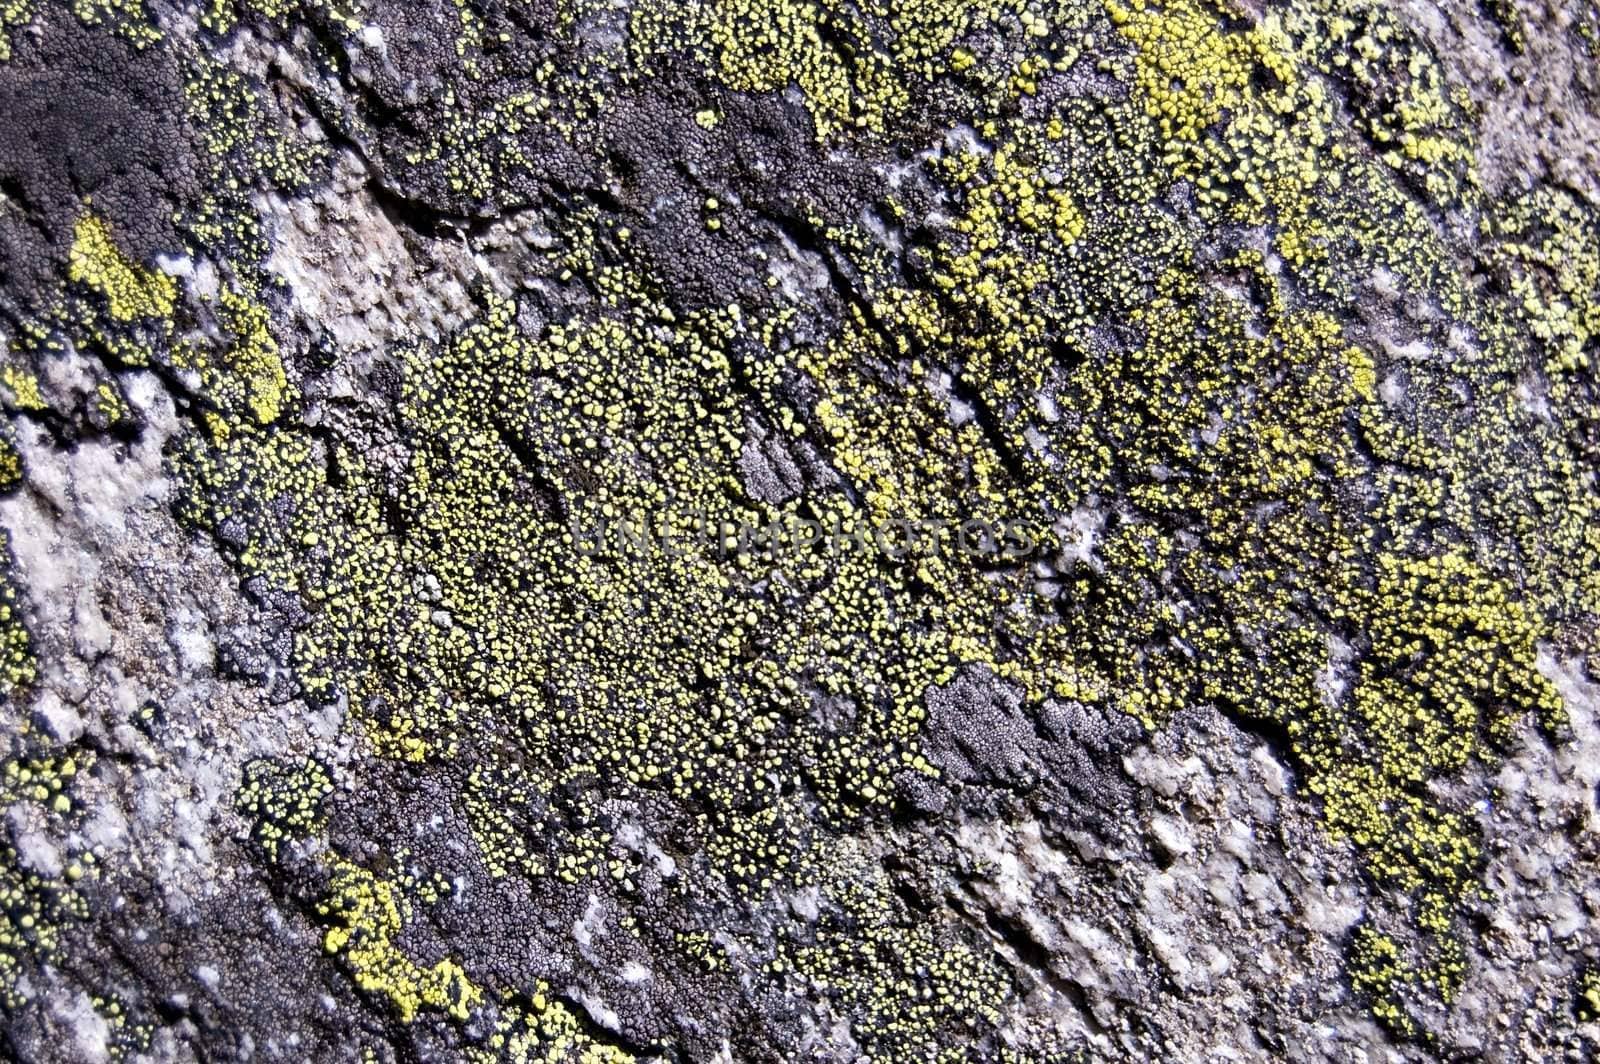 Stone covered with green and gray lichens